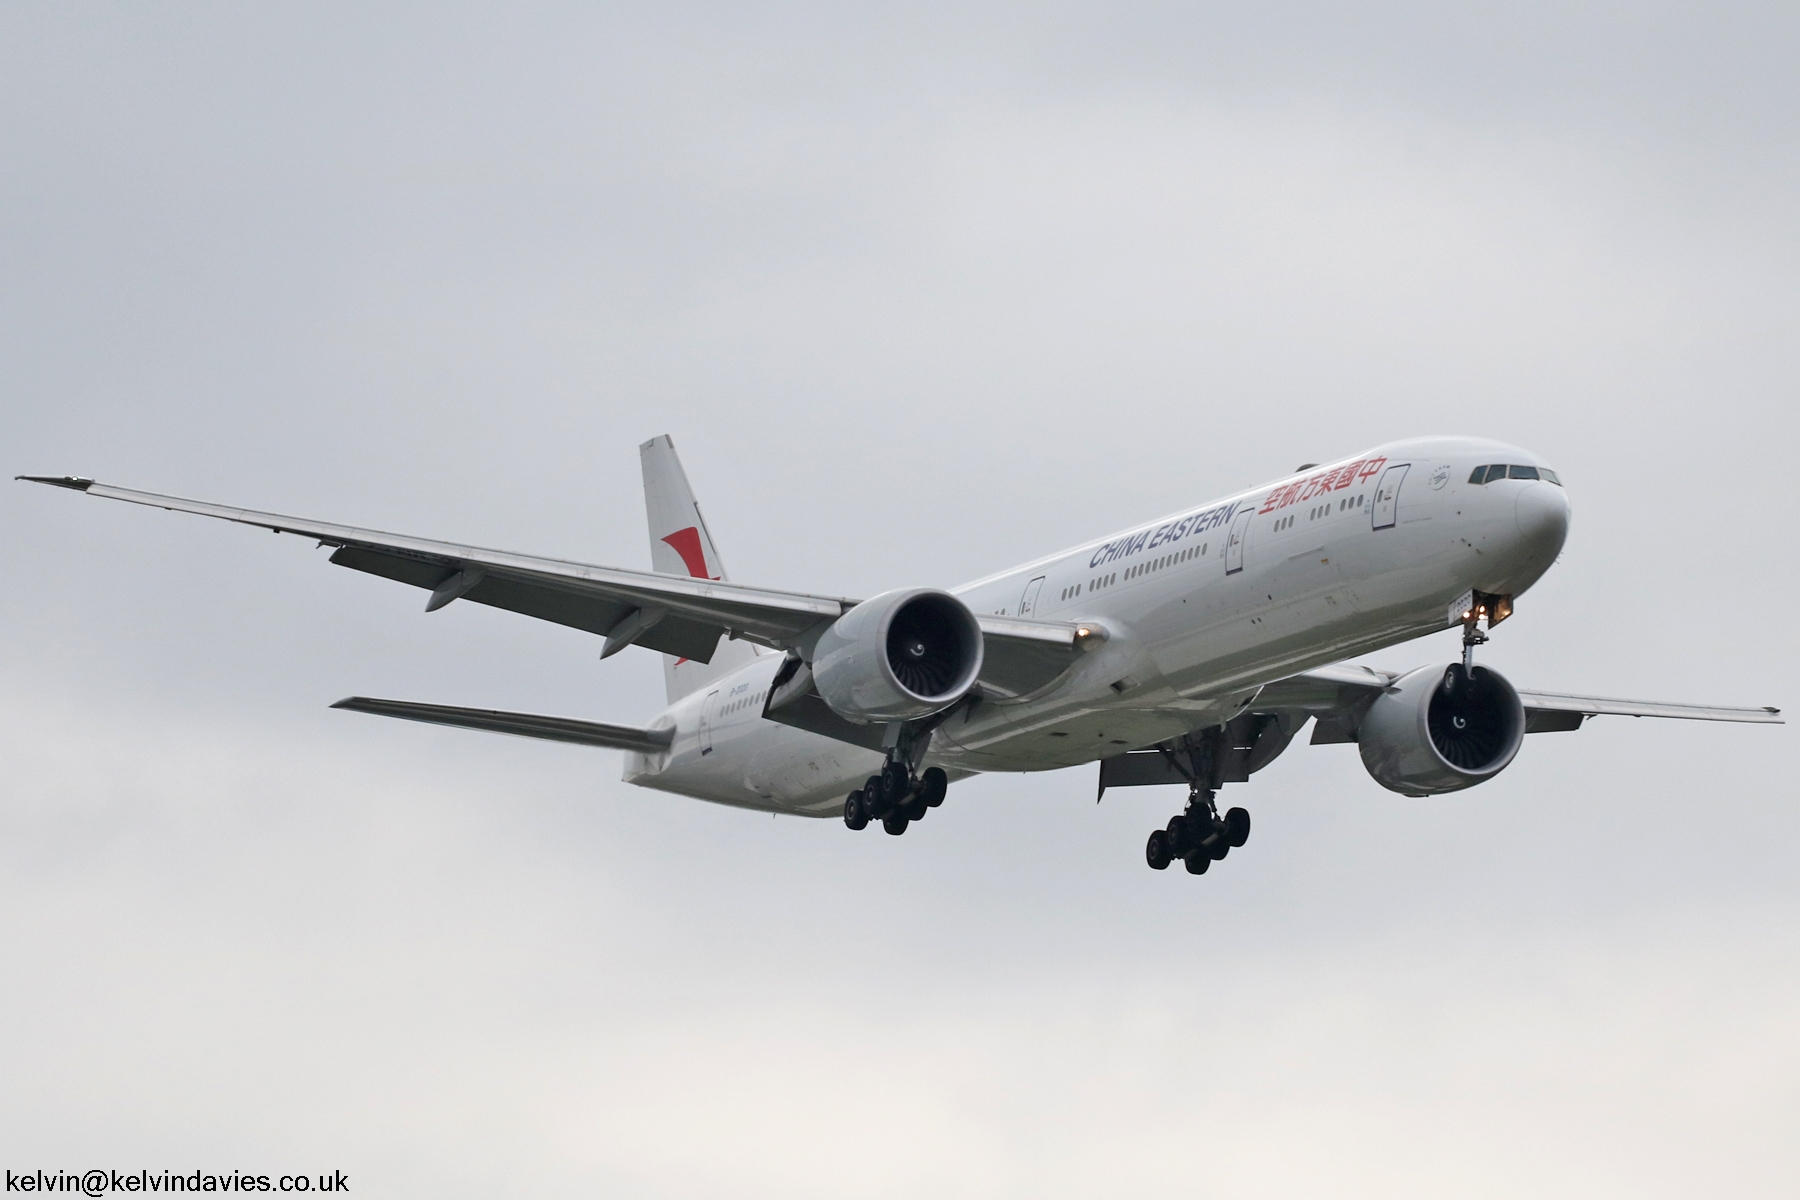 China Eastern Airlines 777 B-2020